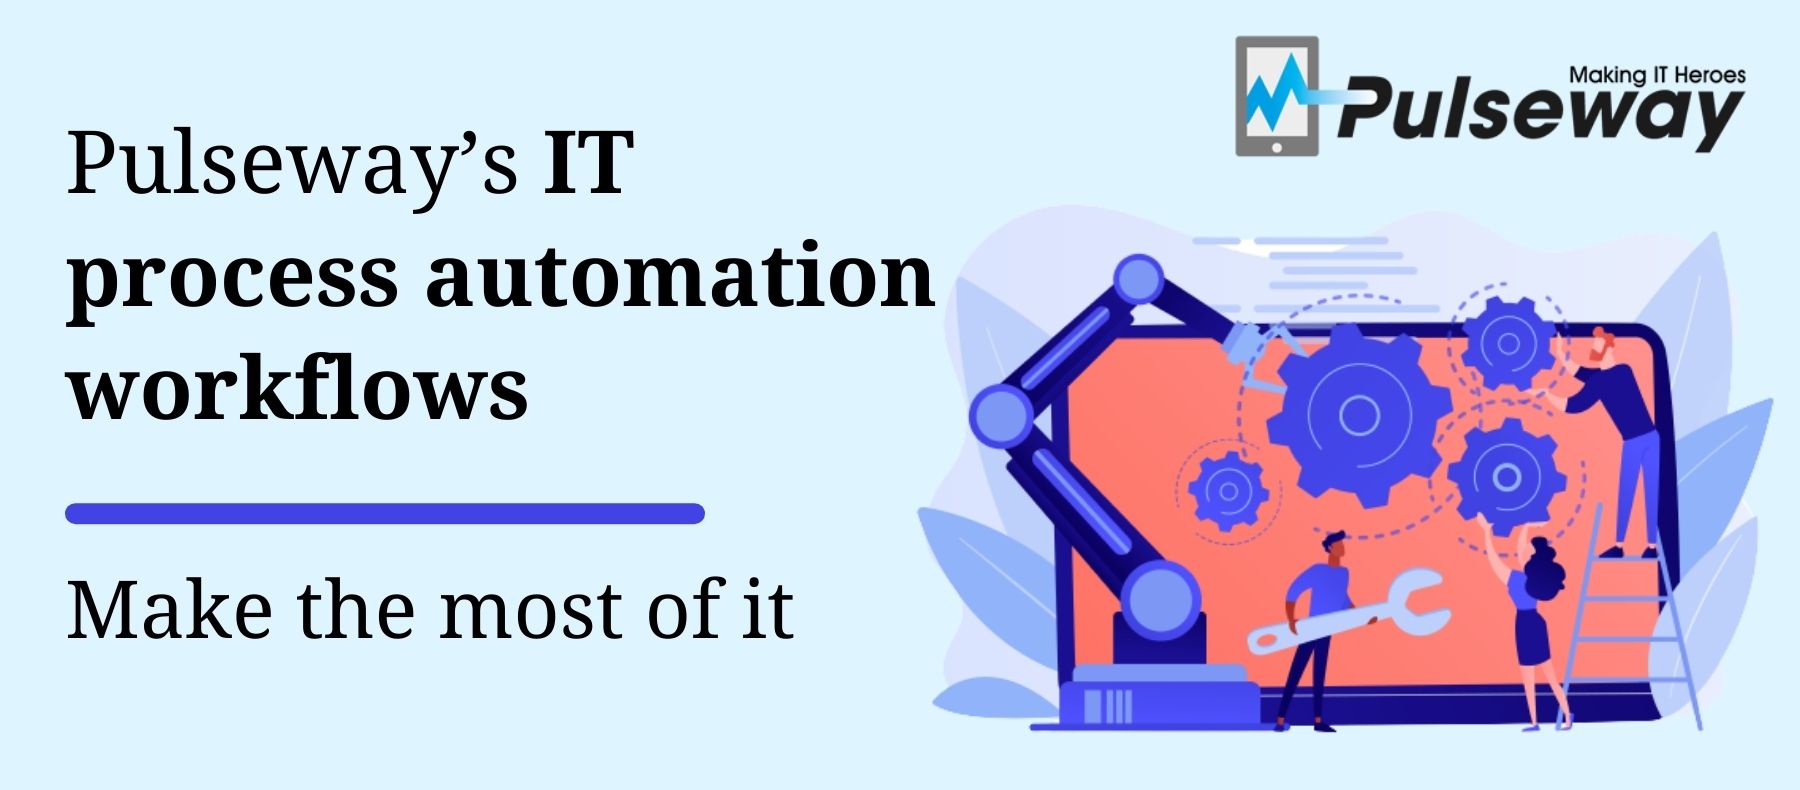 Pulseway’s IT process automation workflows: make the most of it.